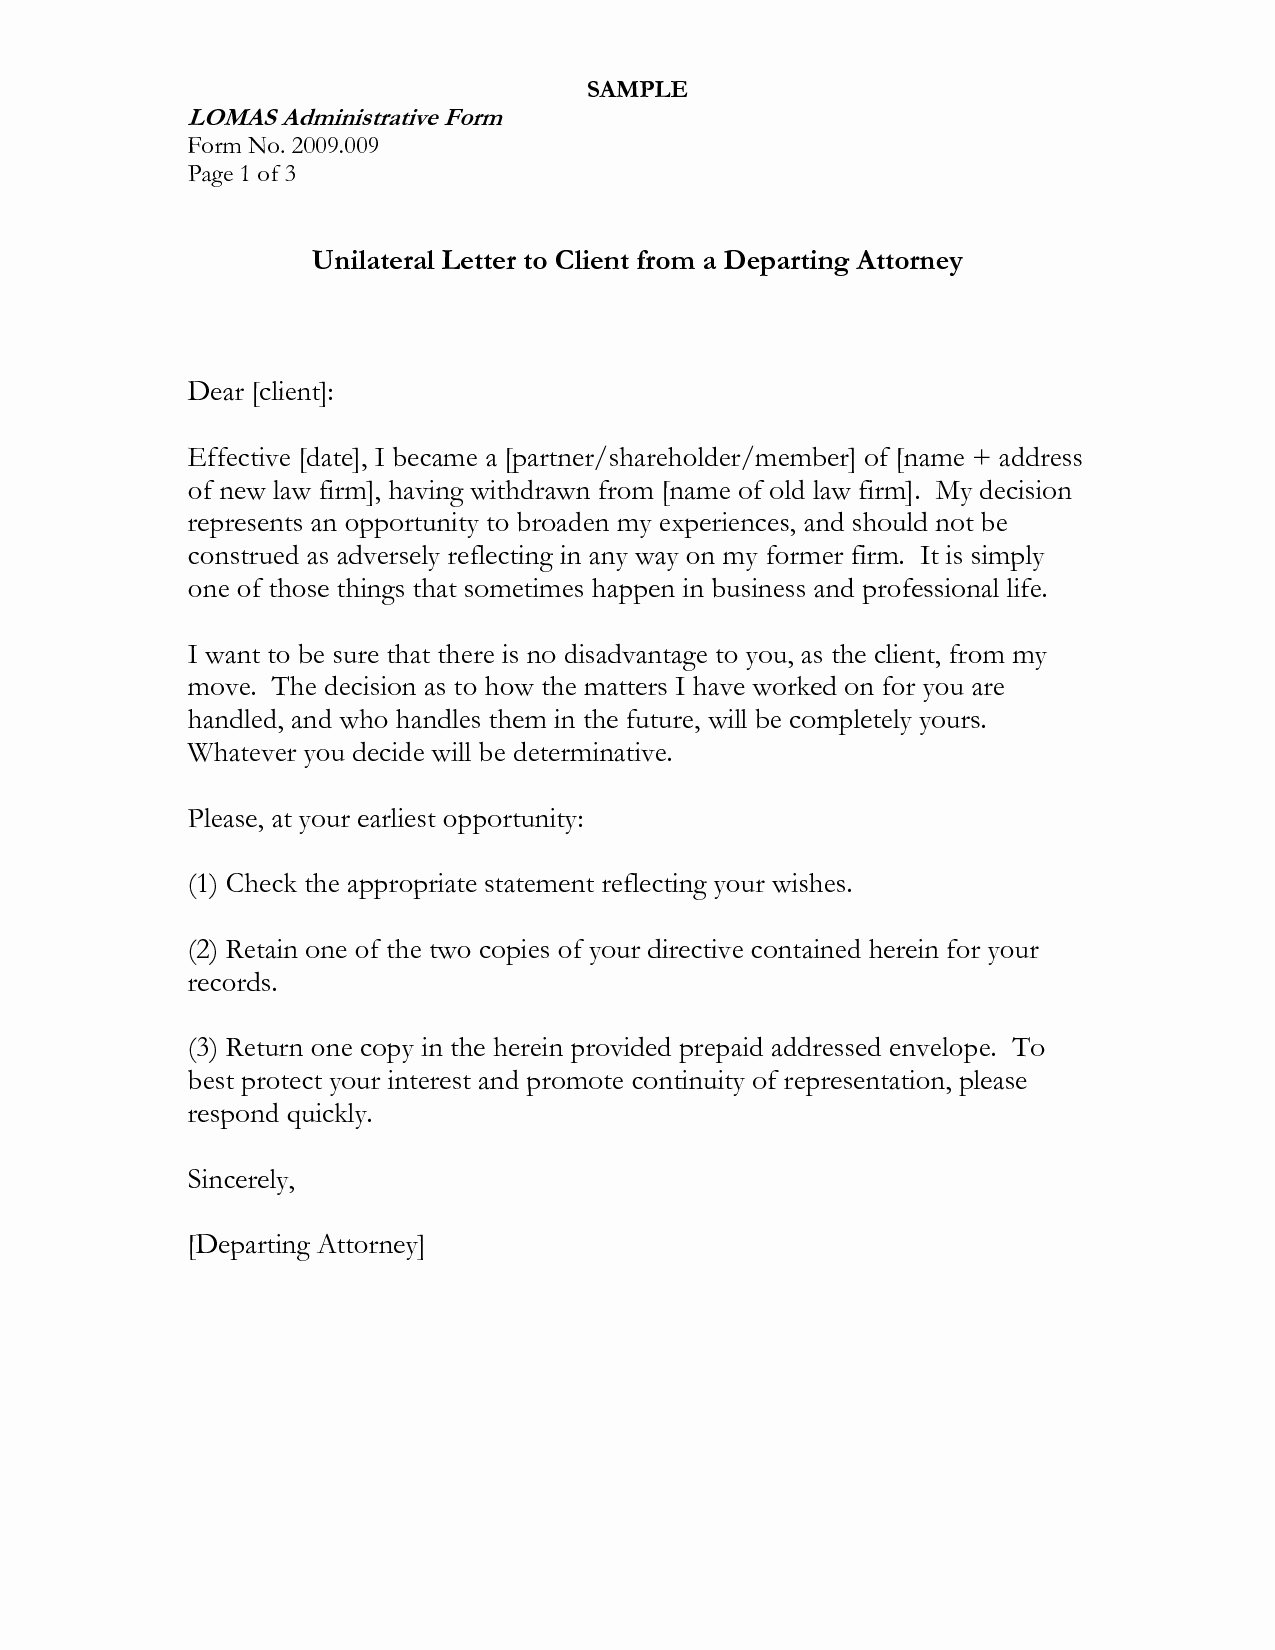 Attorney Client Letter Template Elegant Best S Of Sample Client Letter From attorney Lawyer